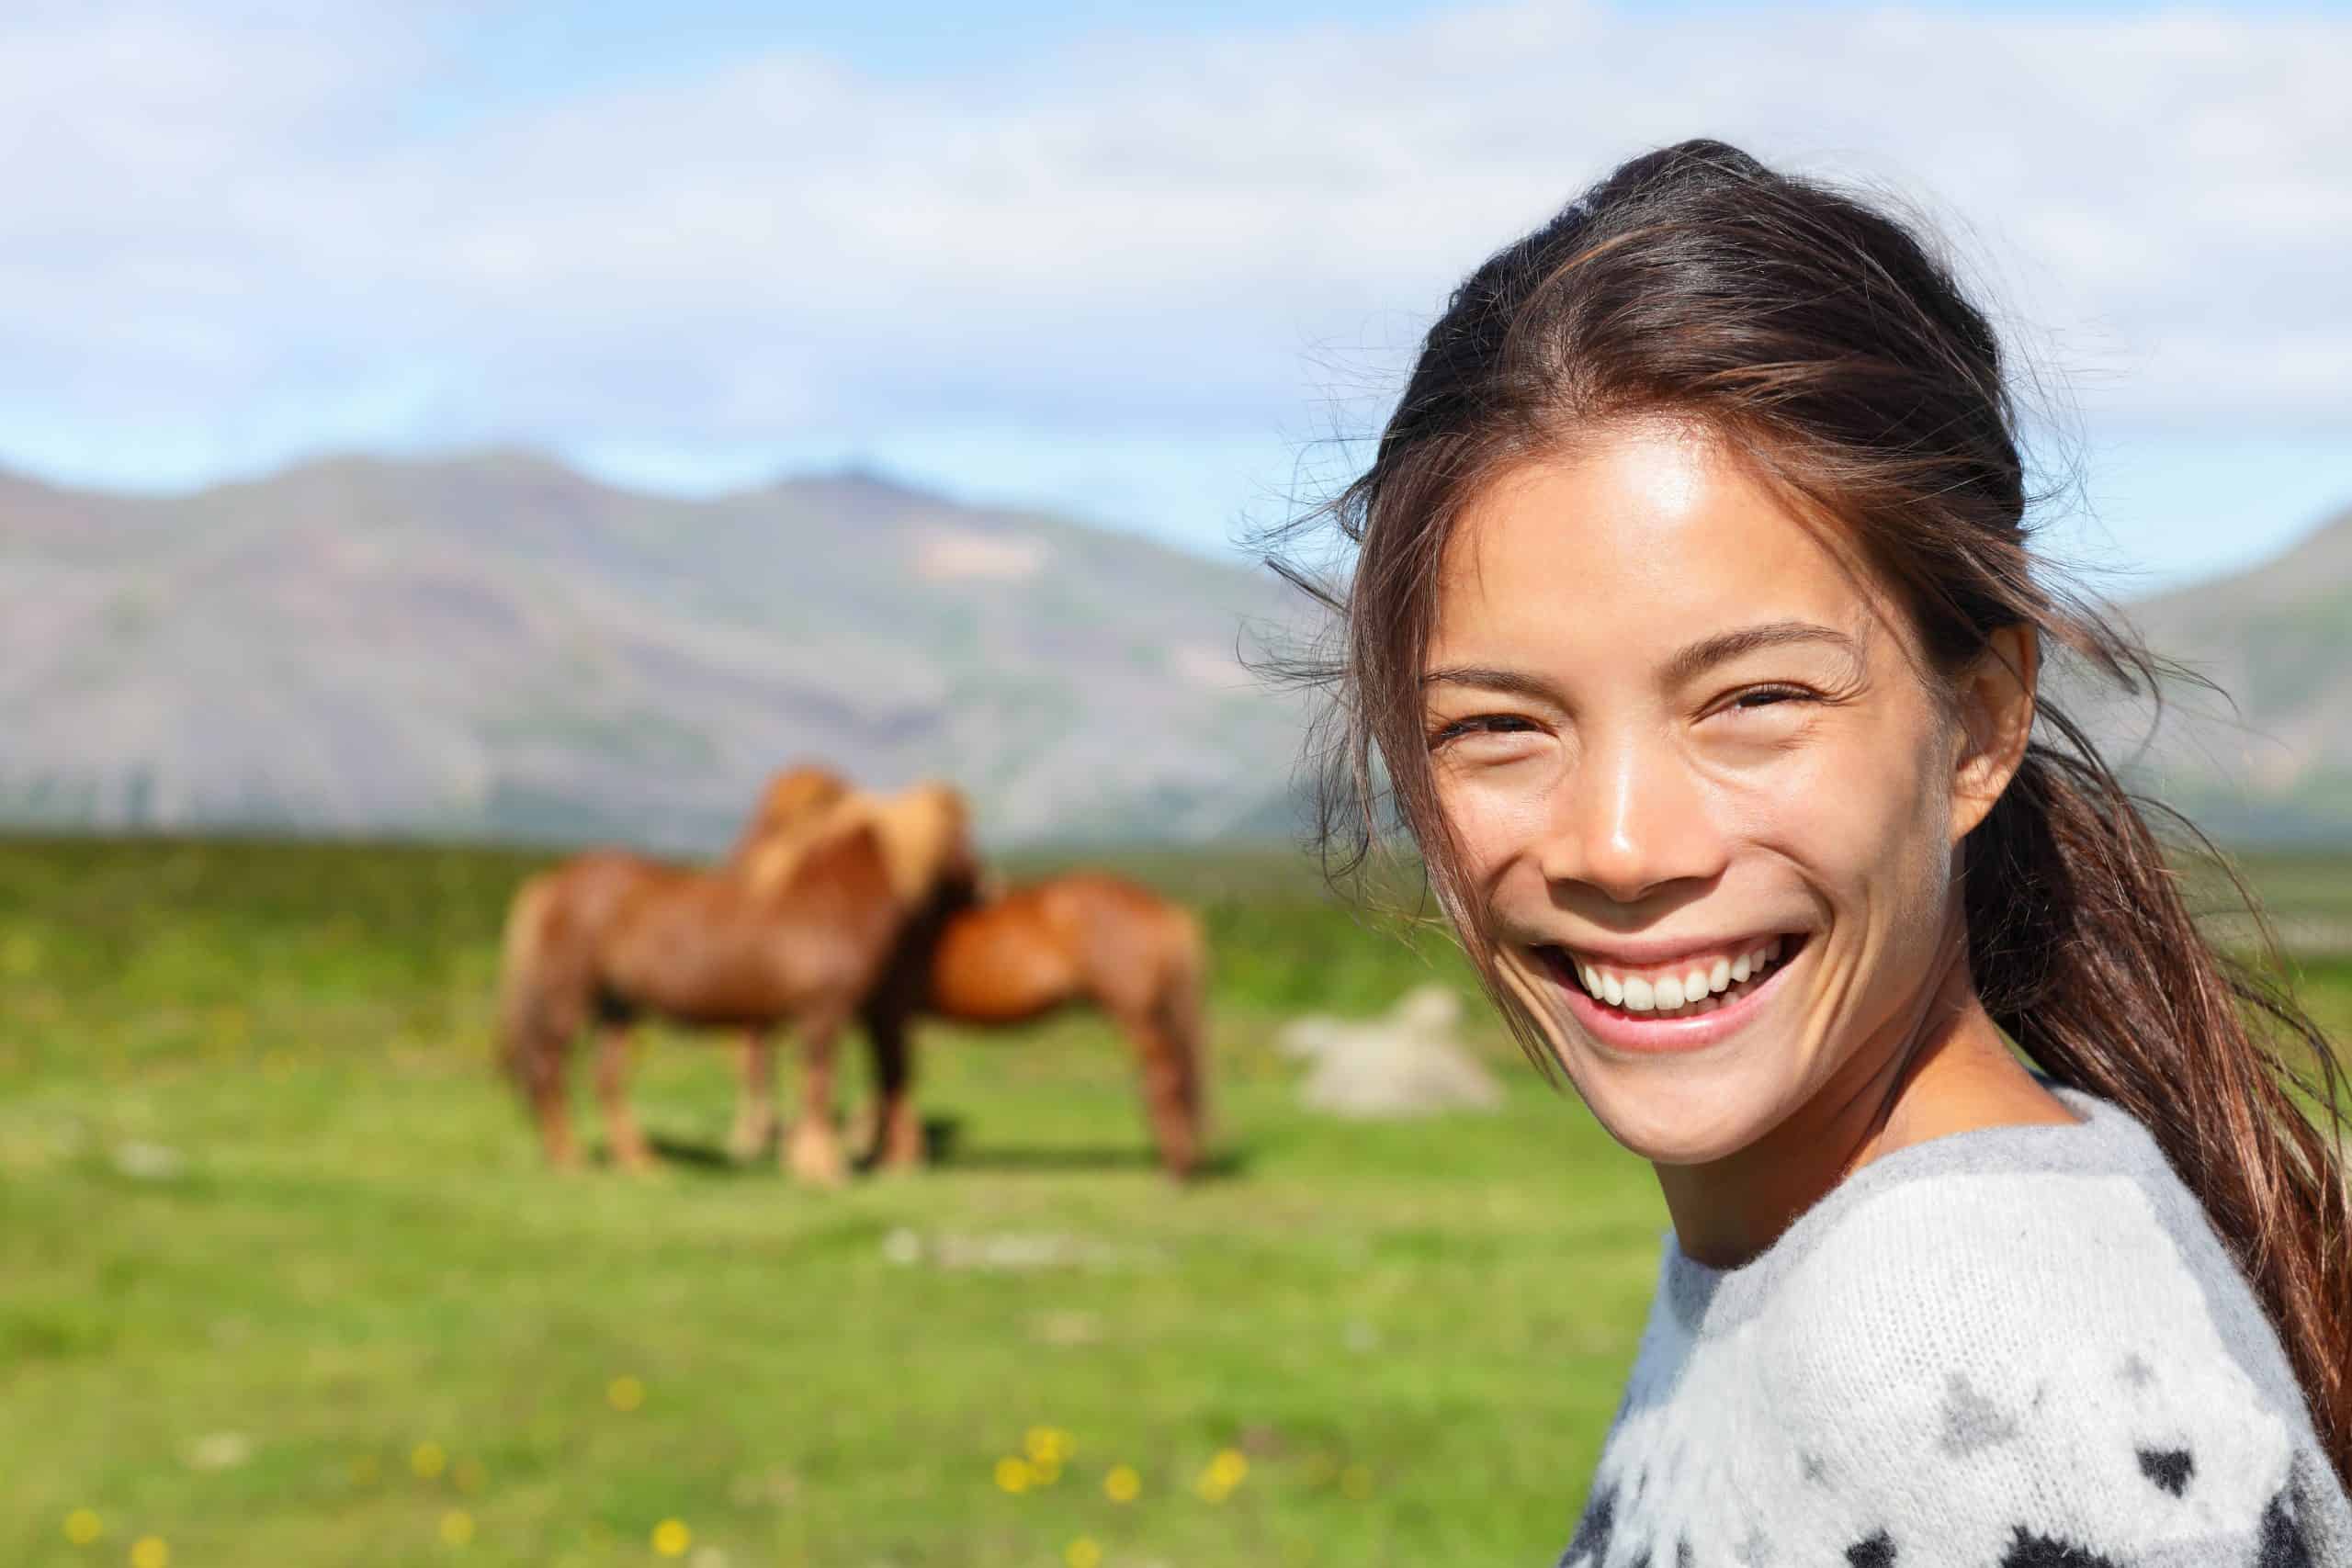 horses mental health benefits Woman on Iceland smiling with Icelandic horses. Portrait of happy multicultural girl wearing Icelandic sweater standing outdoors in nature field in front of horse.